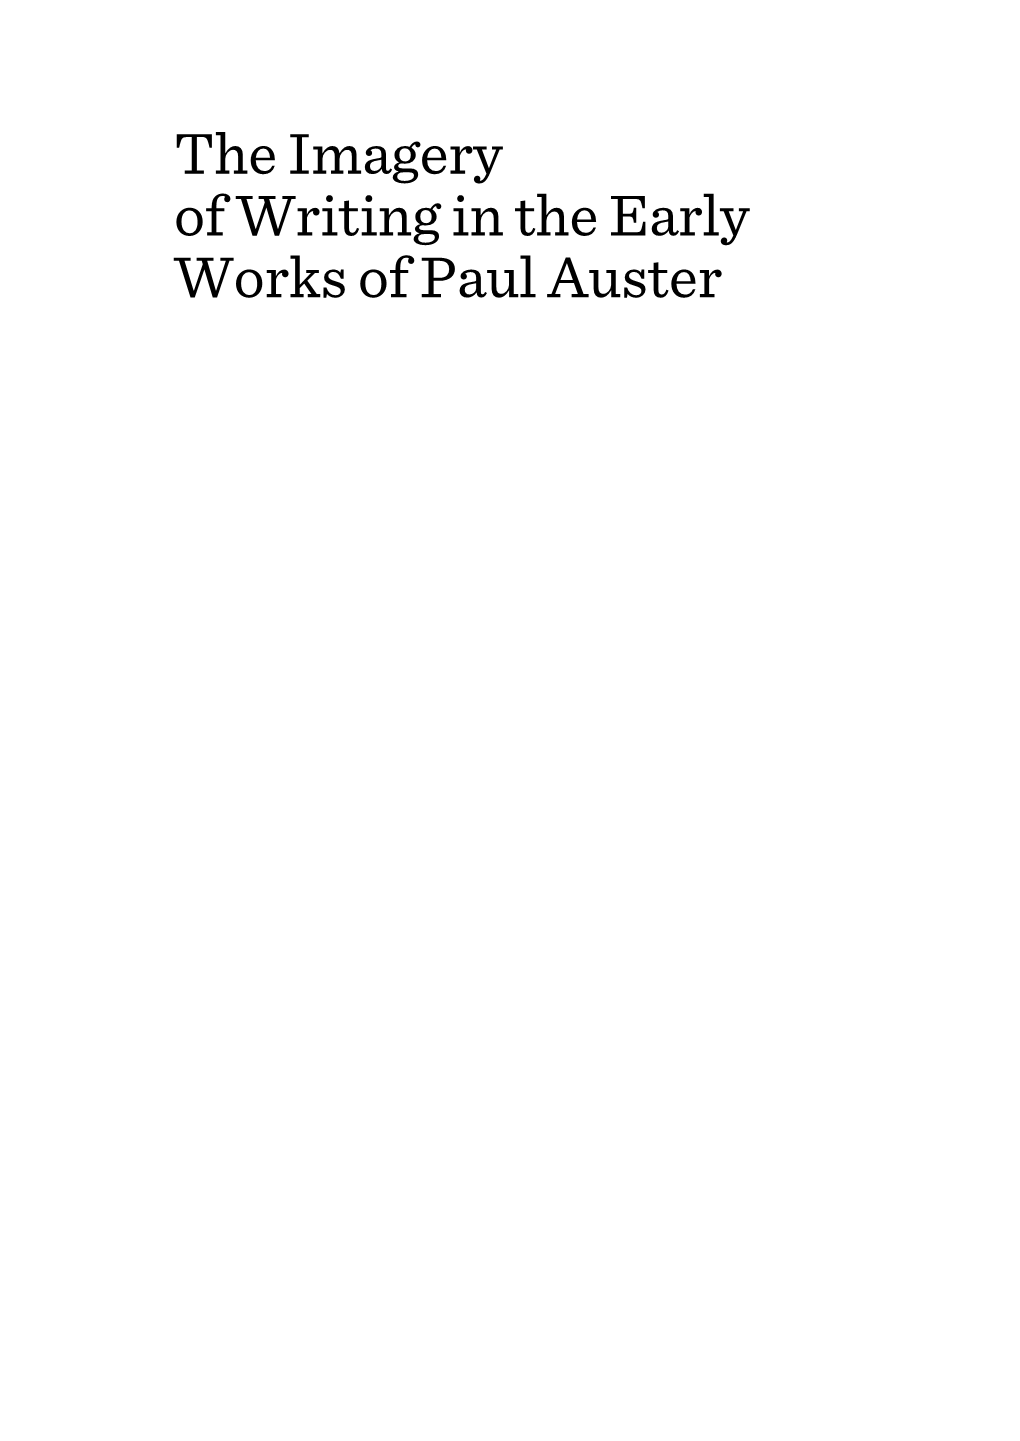 The Imagery of Writing in the Early Works of Paul Auster